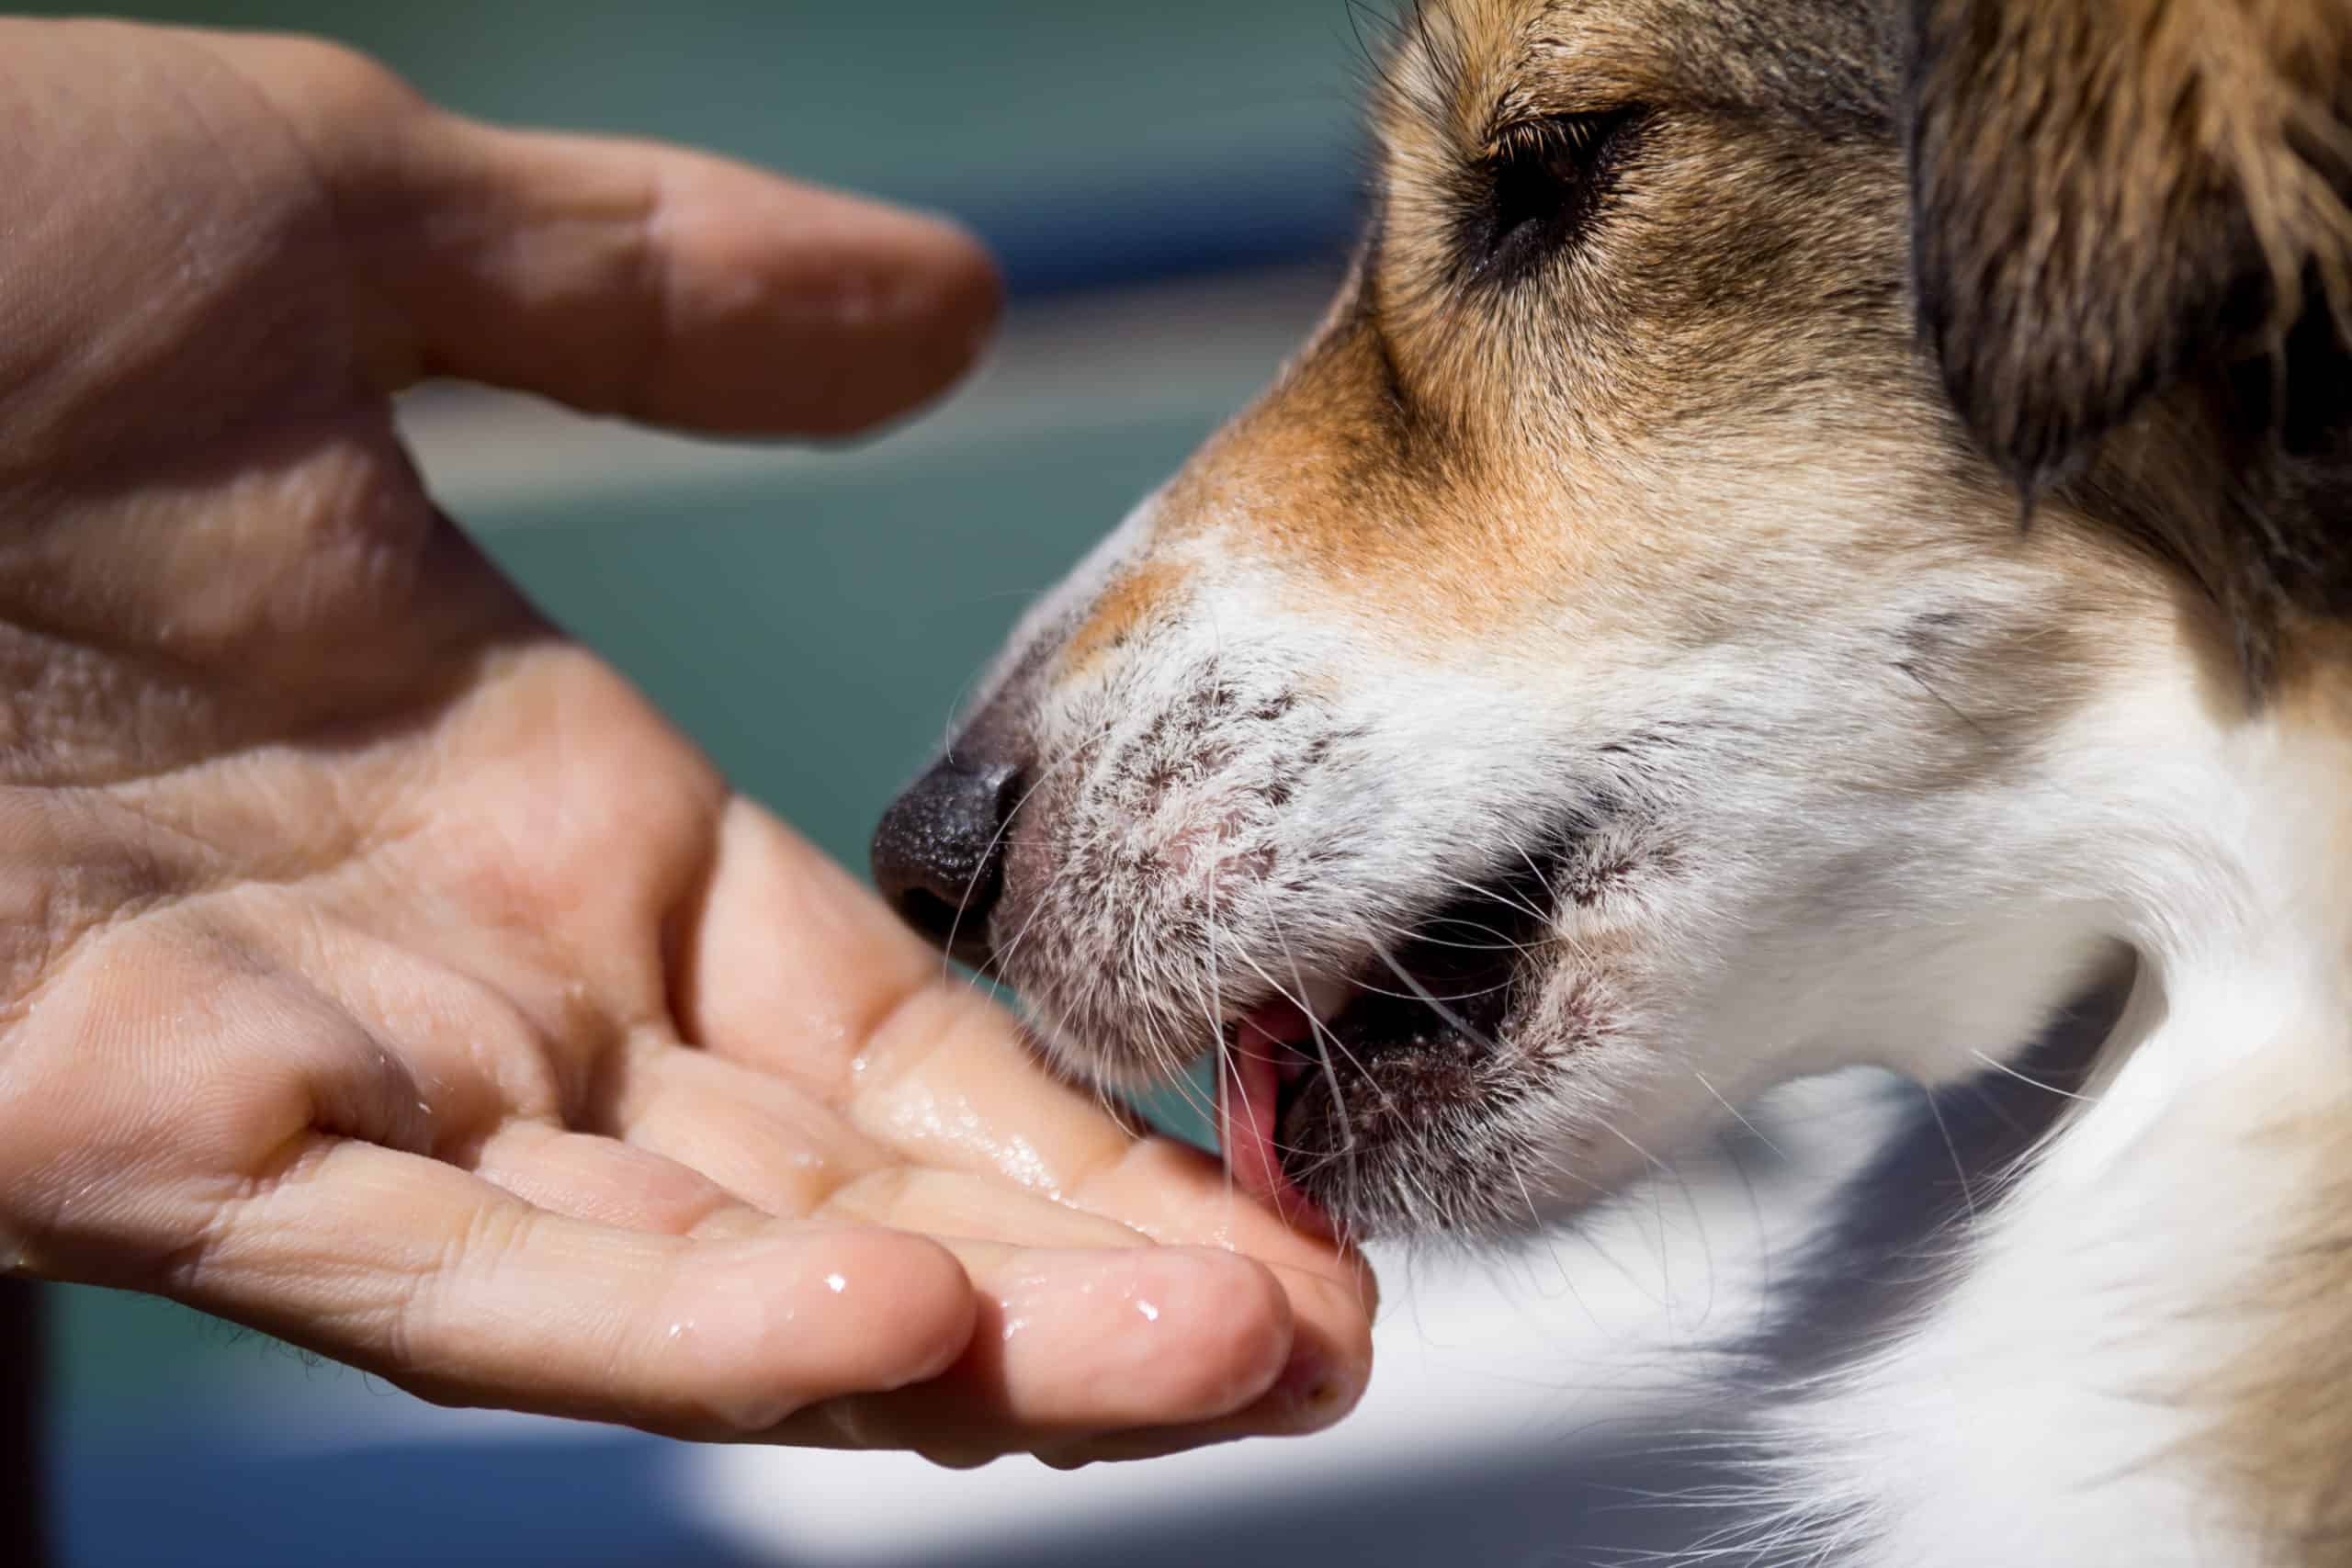 Why do dogs want to lick your cuts, scabs, or wounds?